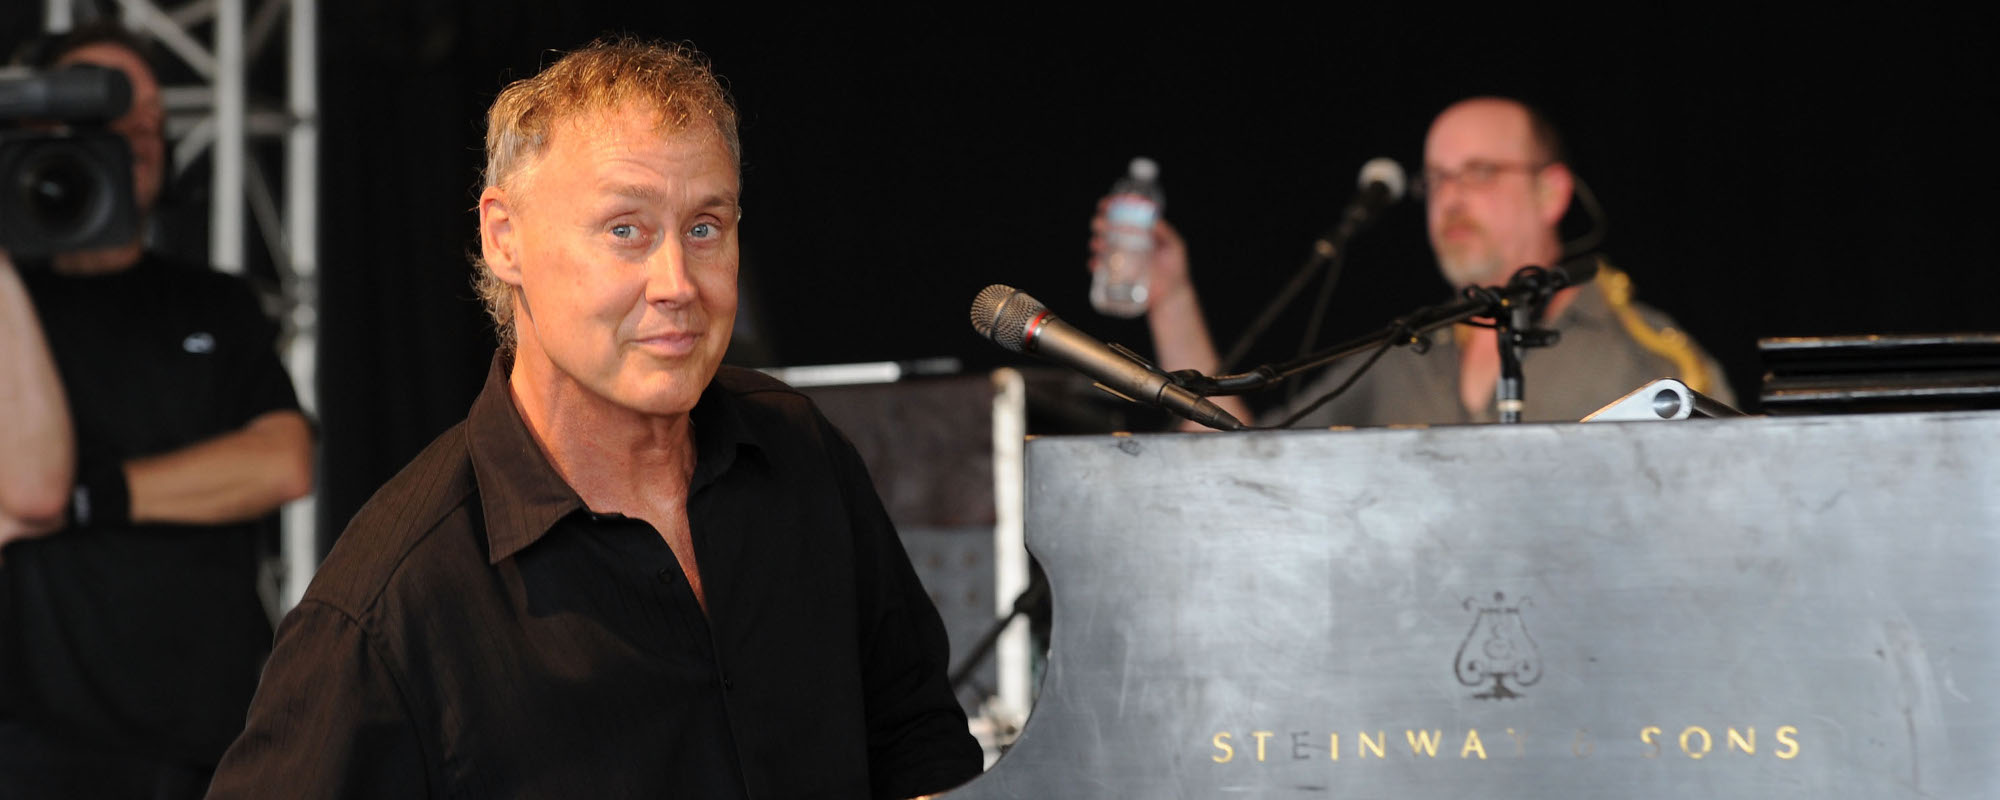 How Bruce Hornsby Helped Huey Lewis and the News Land Their Third No. 1 Single “Jacob’s Ladder”